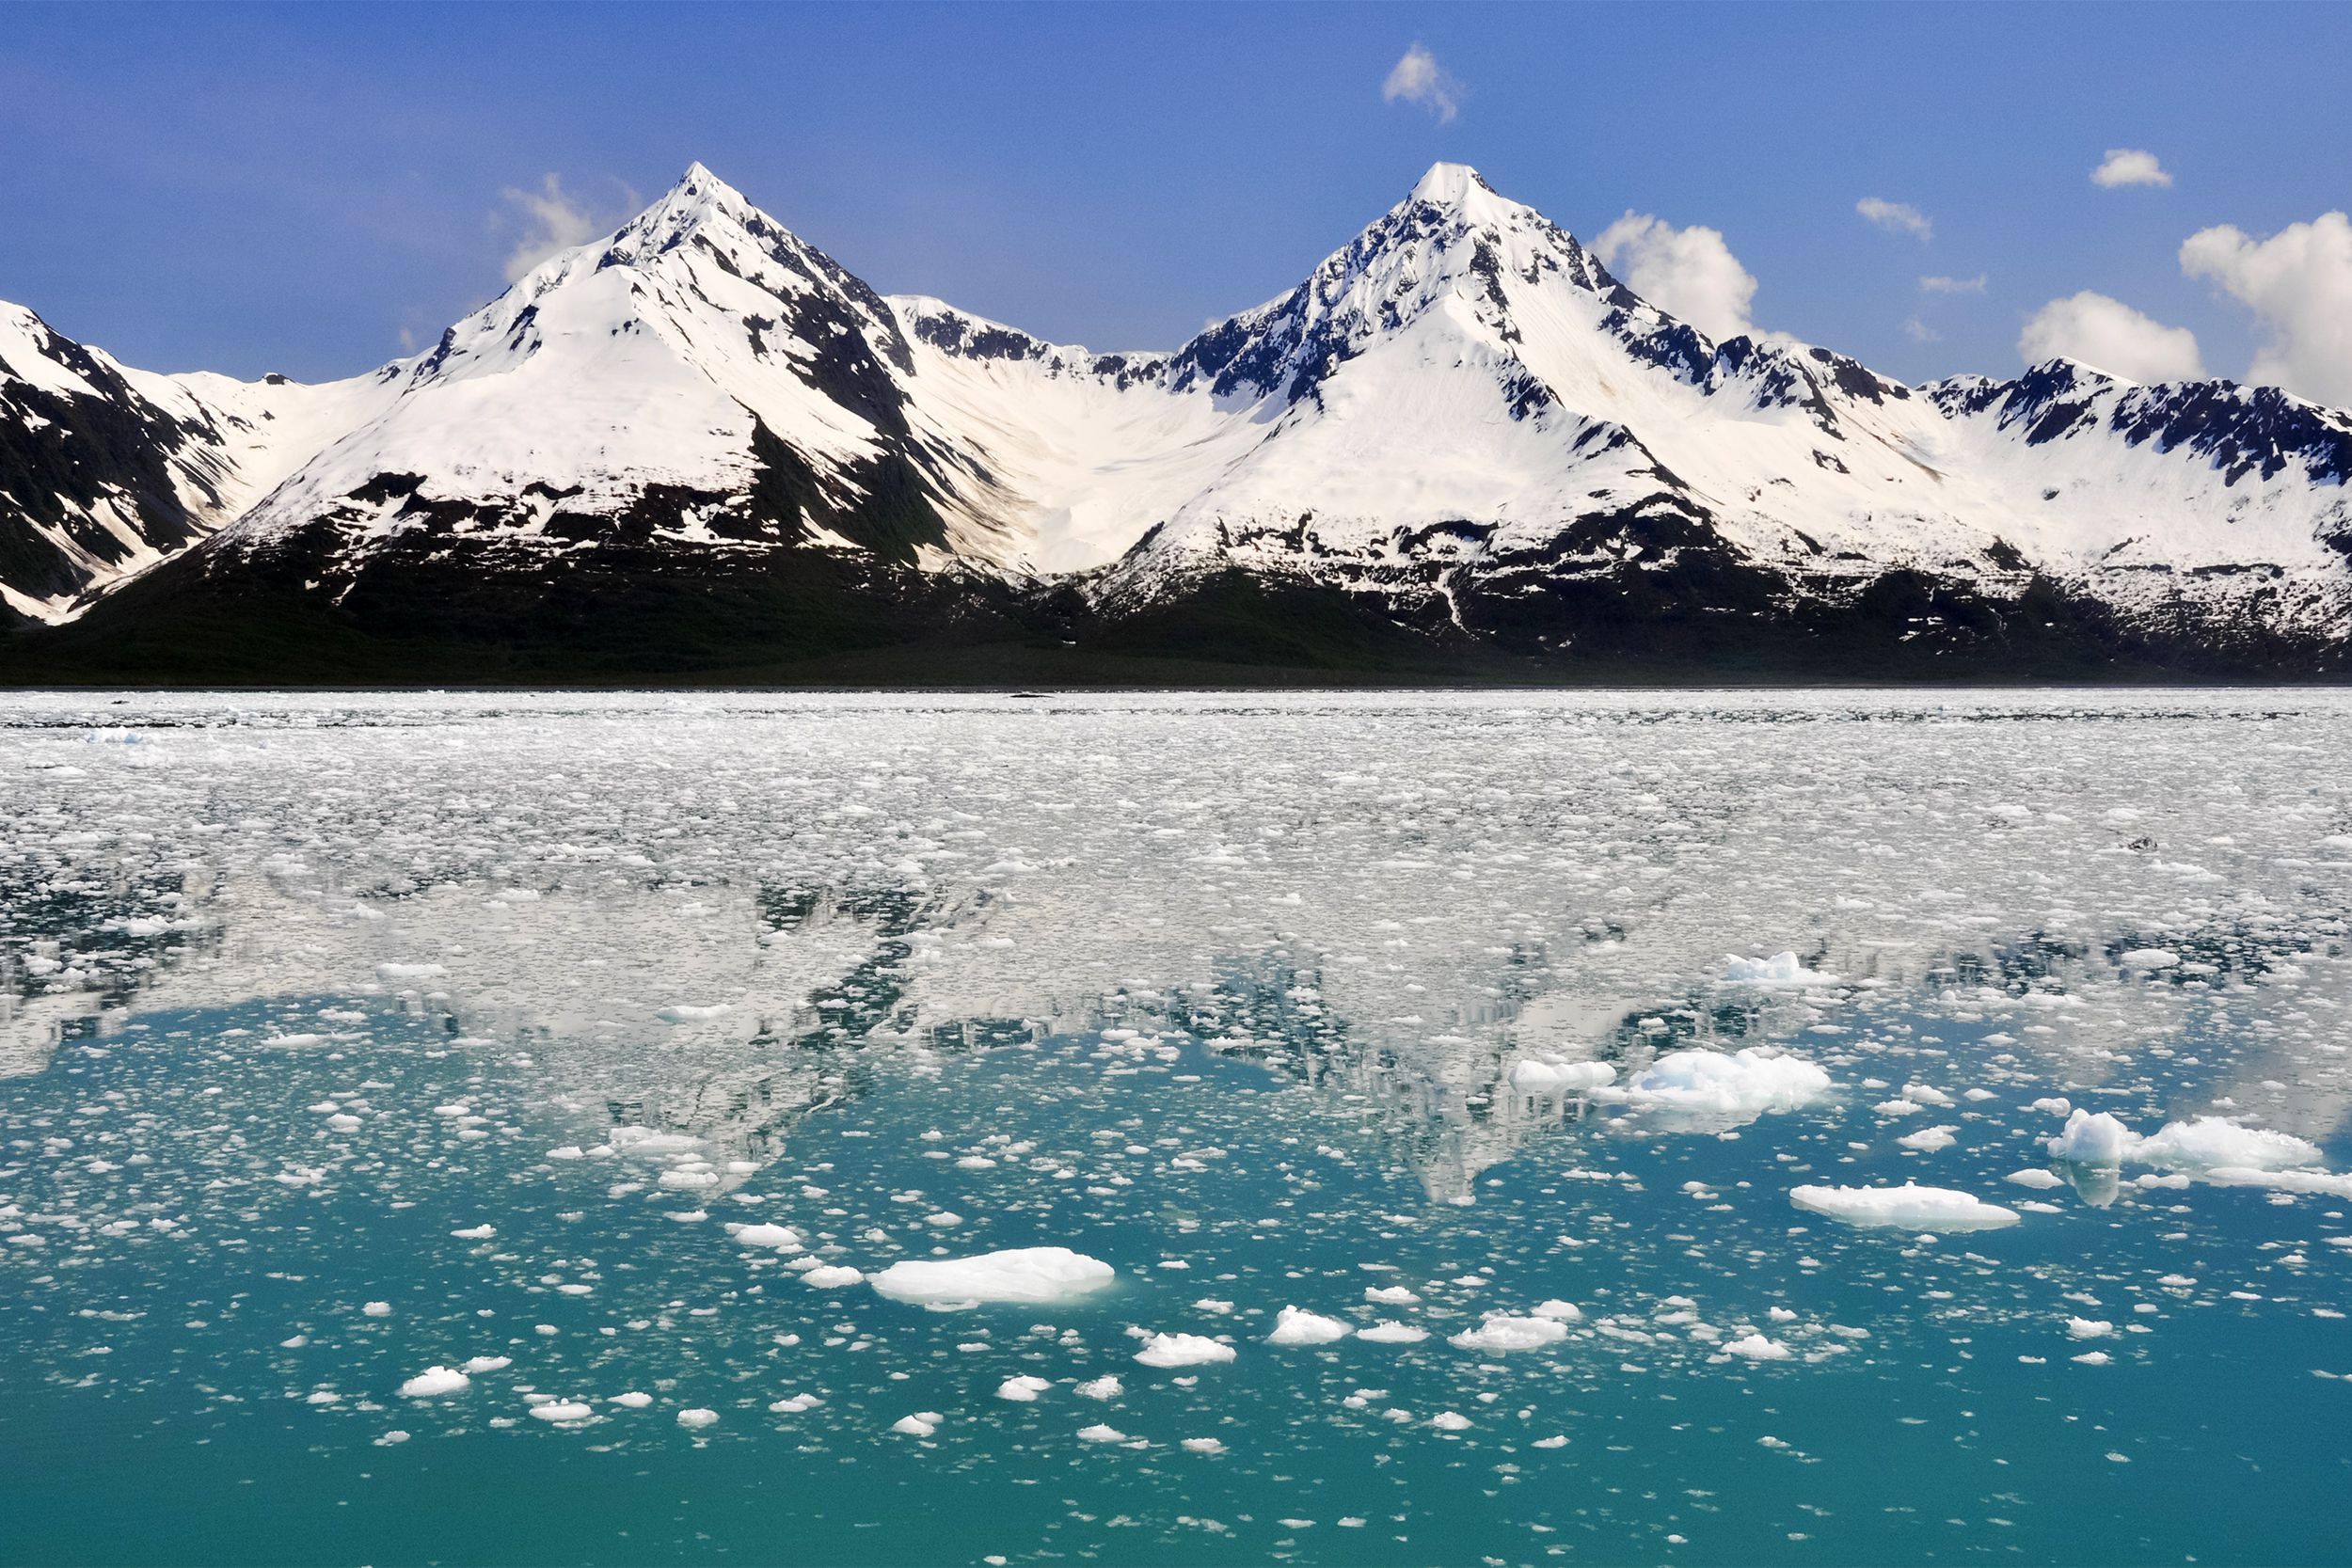 <p>If there's any place left on the planet where the Ice Age can be said to survive, it is perhaps <a href="https://www.nps.gov/kefj/index.htm">Kenai Fjords National Park</a>. About 40 glaciers are found within among lush forests and thriving wildlife. Even here, though, glaciers are shrinking as global warming takes its toll. </p>